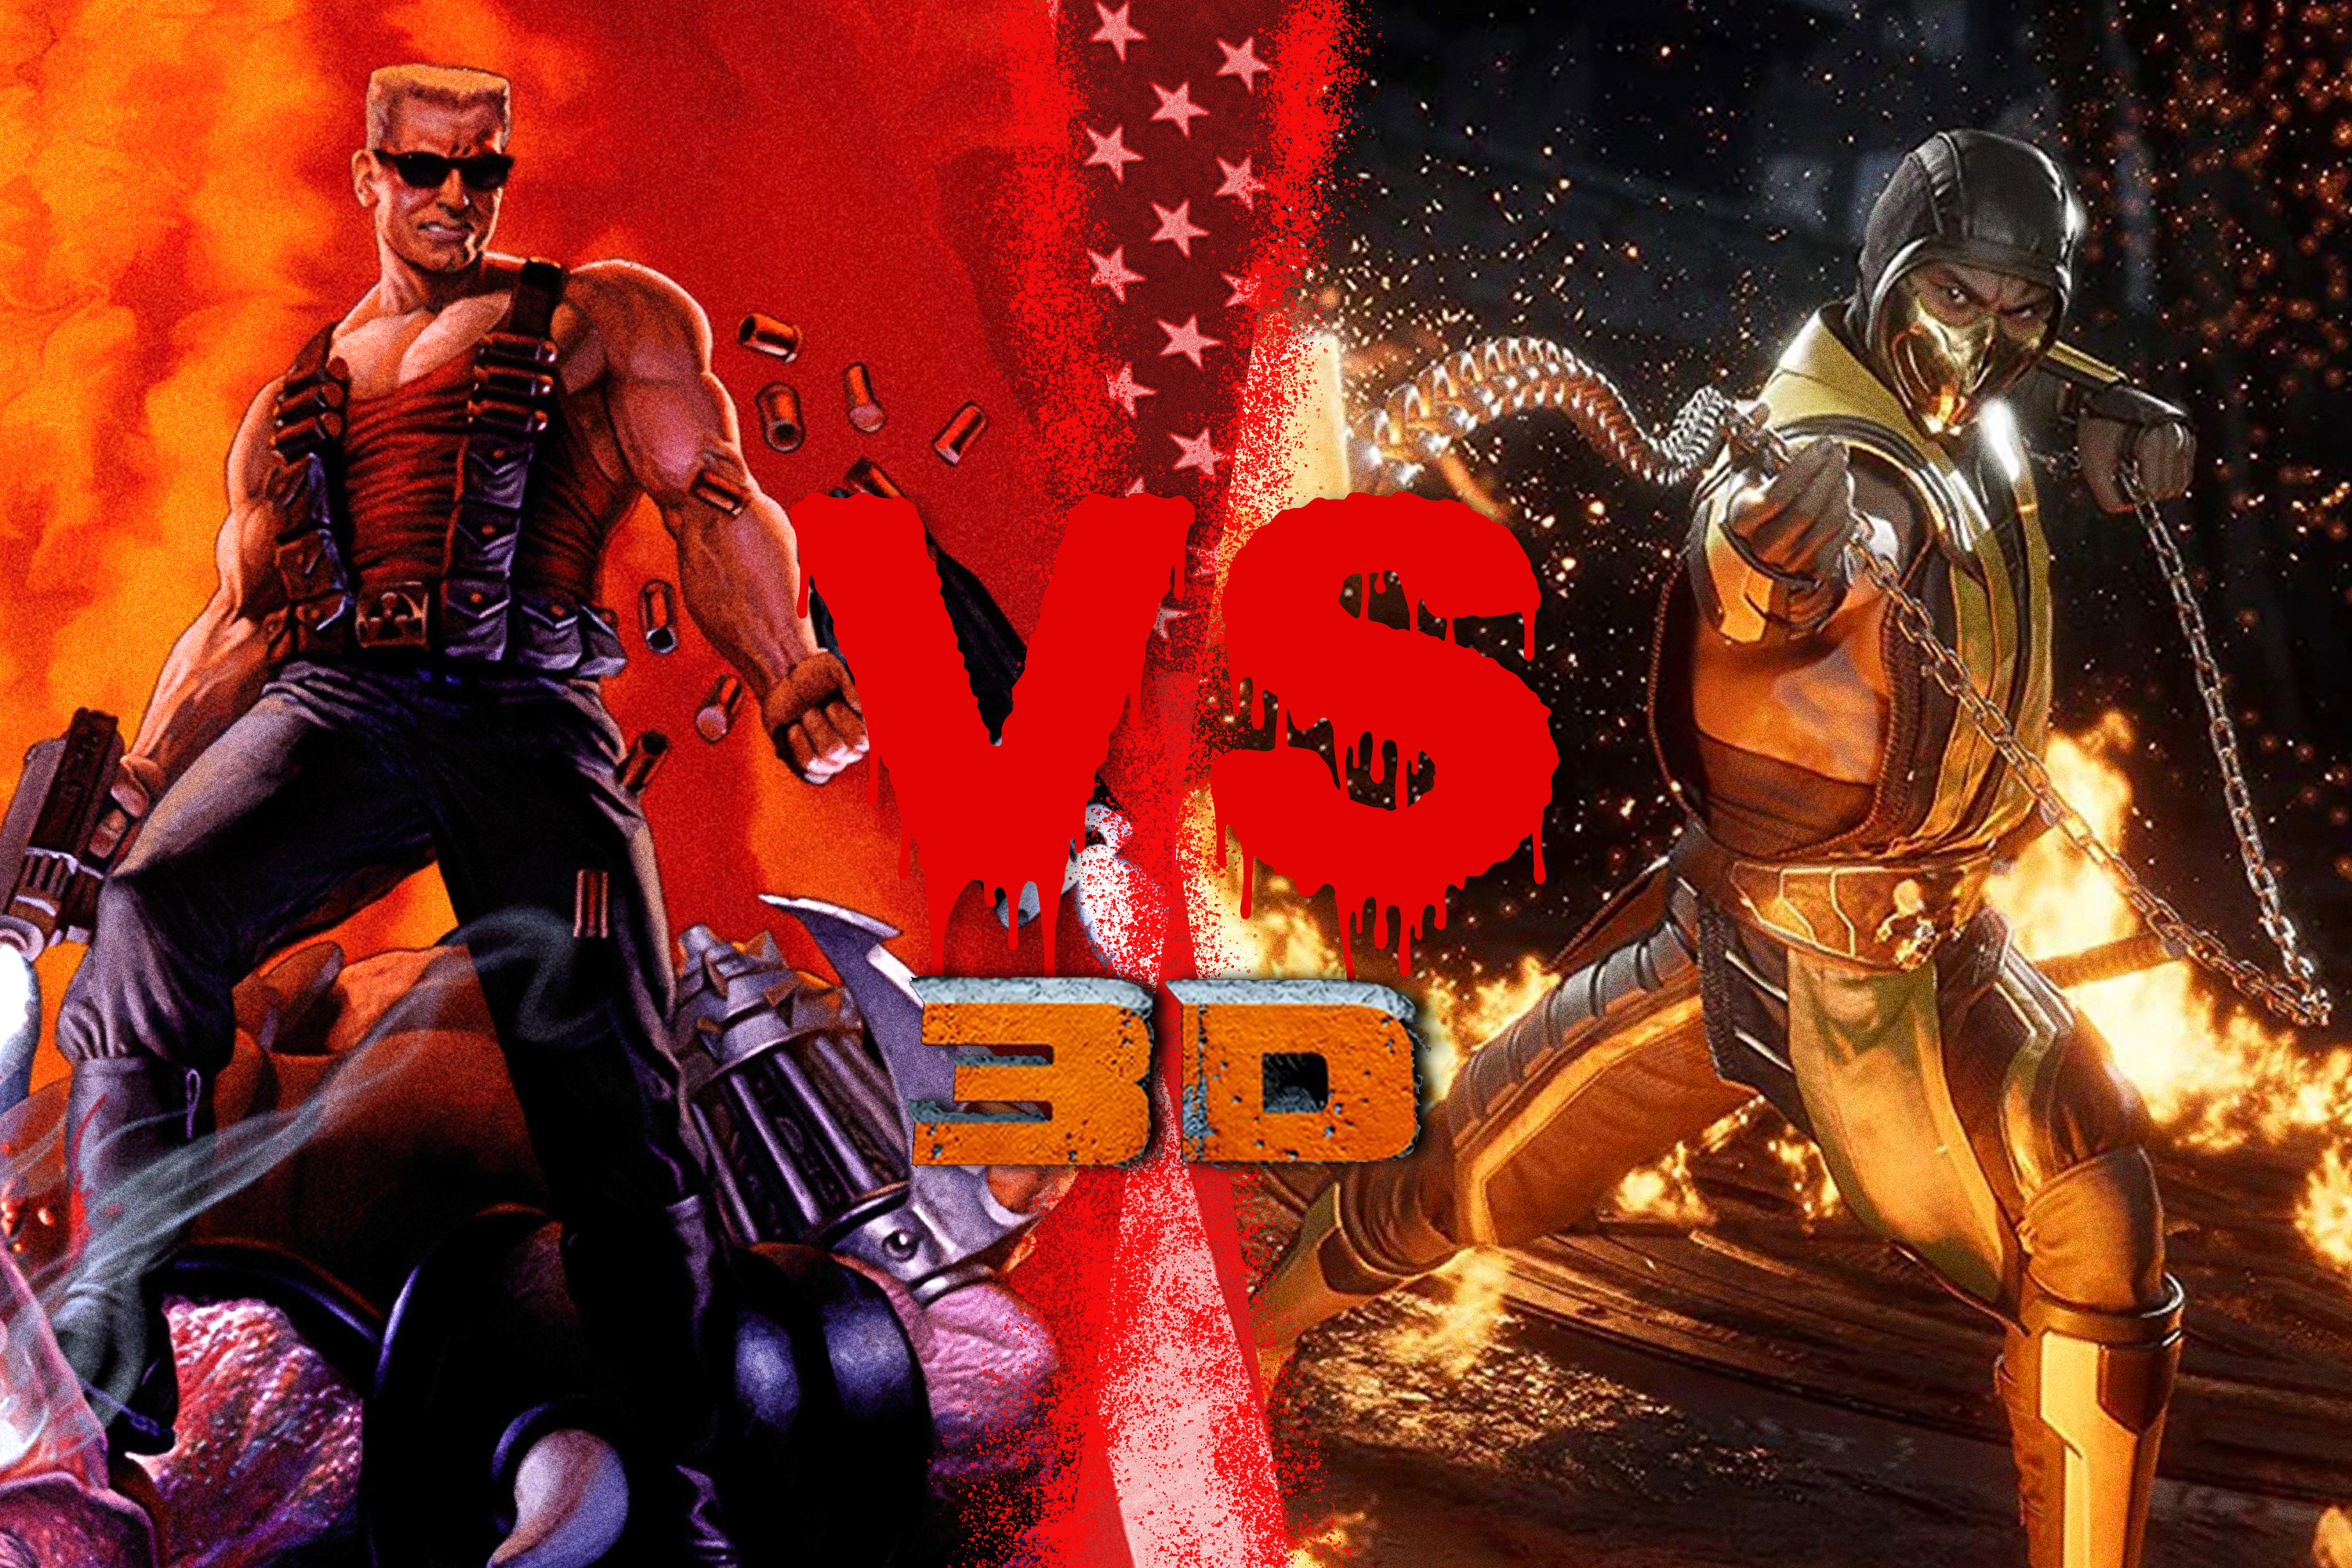 Images of Duke Nukem and Scorpion (from Mortal Kombat) looking totally bad-ass